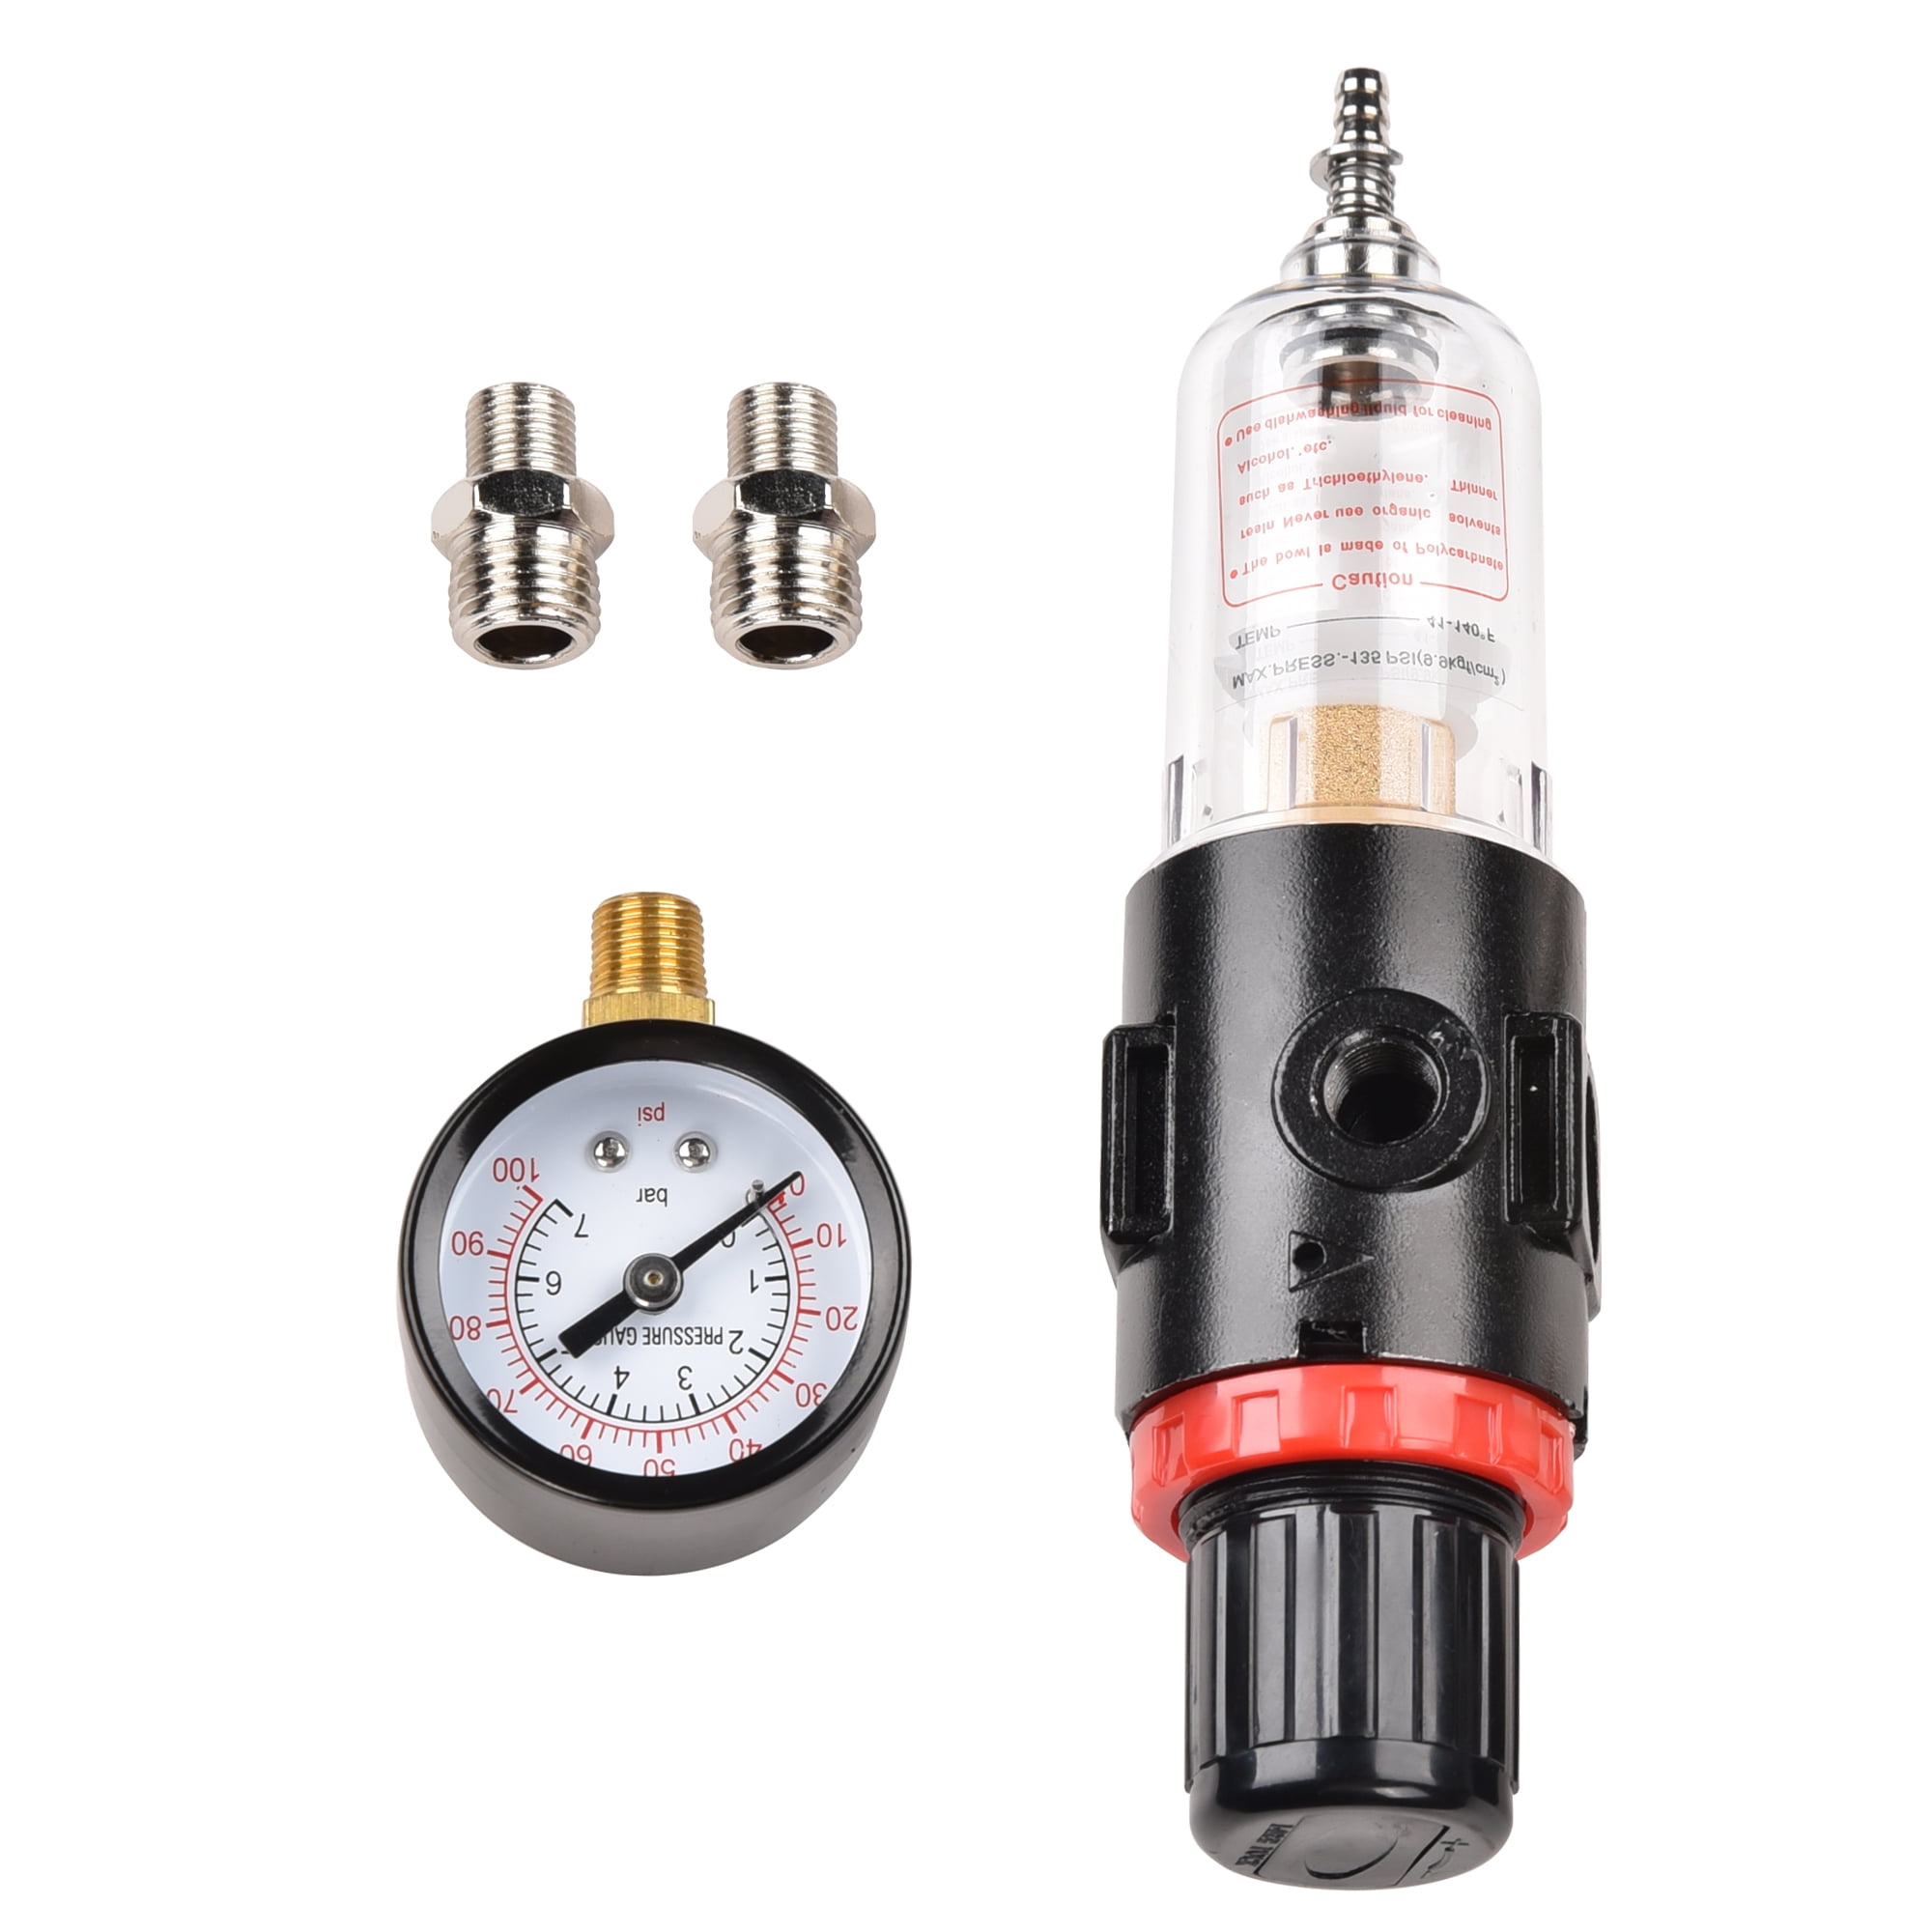 PointZero Pro Airbrush Air Compressor Regulator with Water-Trap Filter